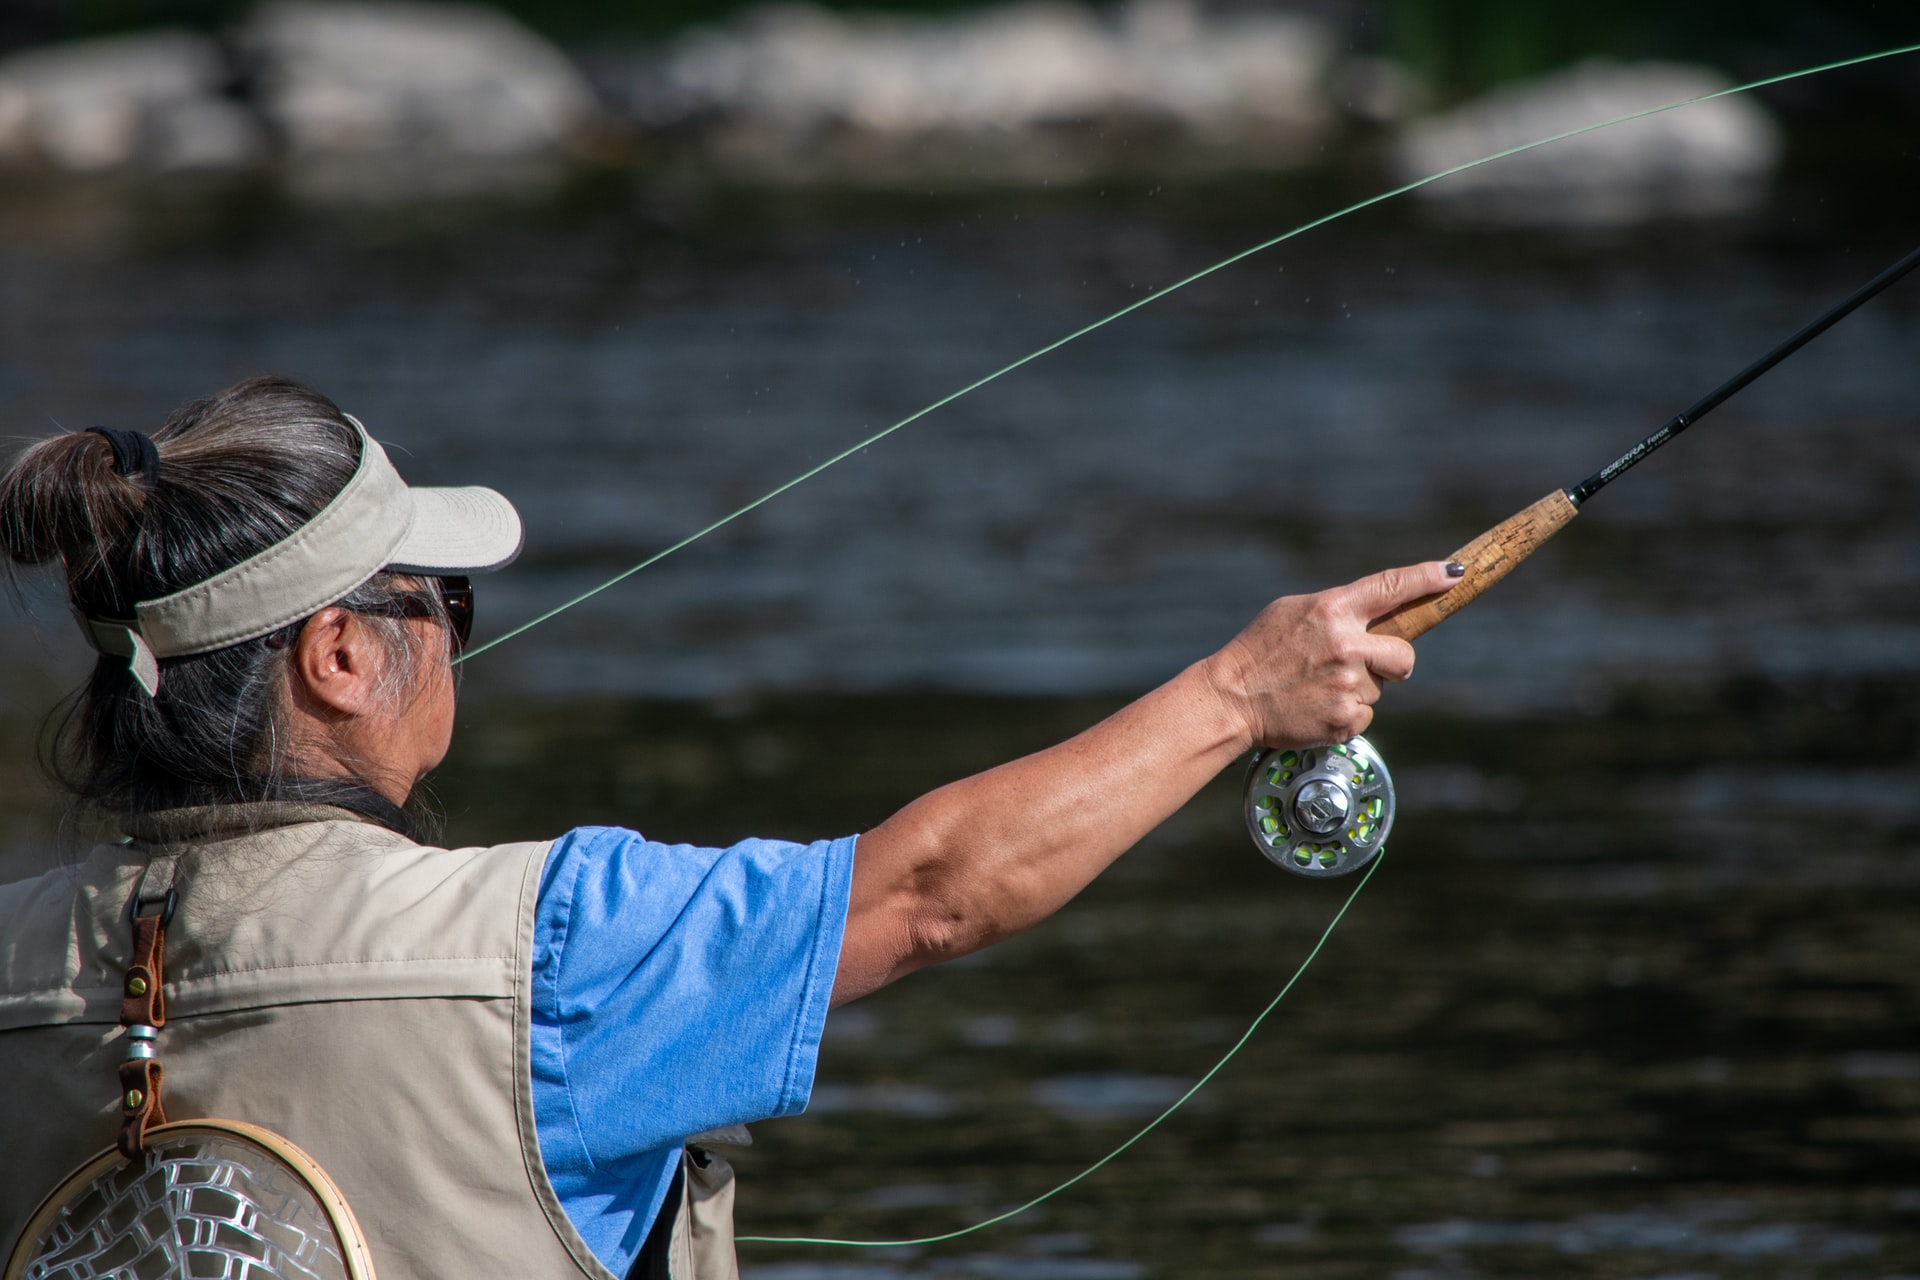 Best Fly Fishing Rods of 2020 